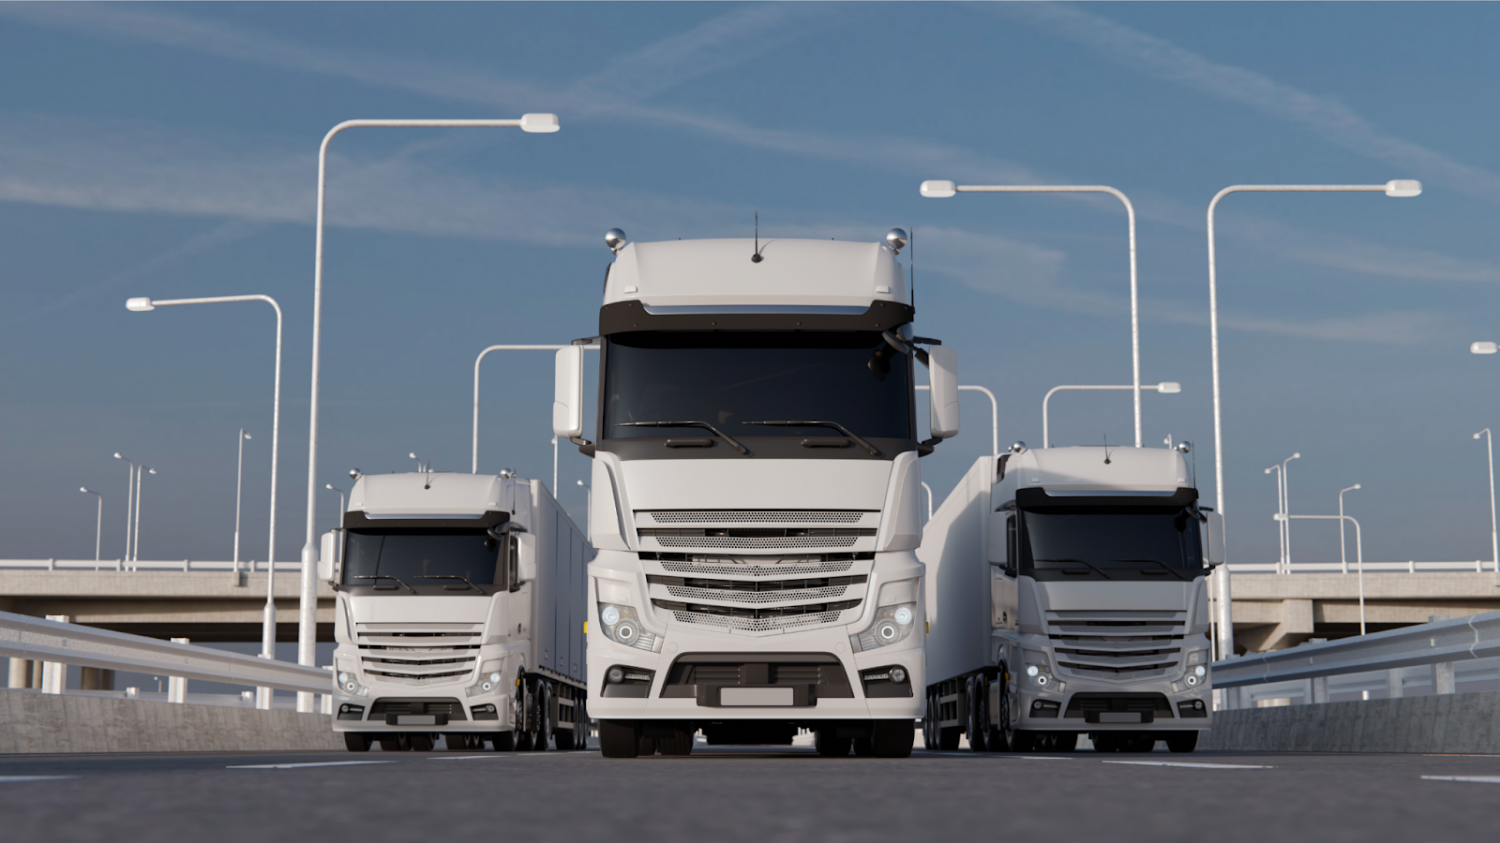 From Basic GPS Tracking to Advanced ADAS in Fleet Management